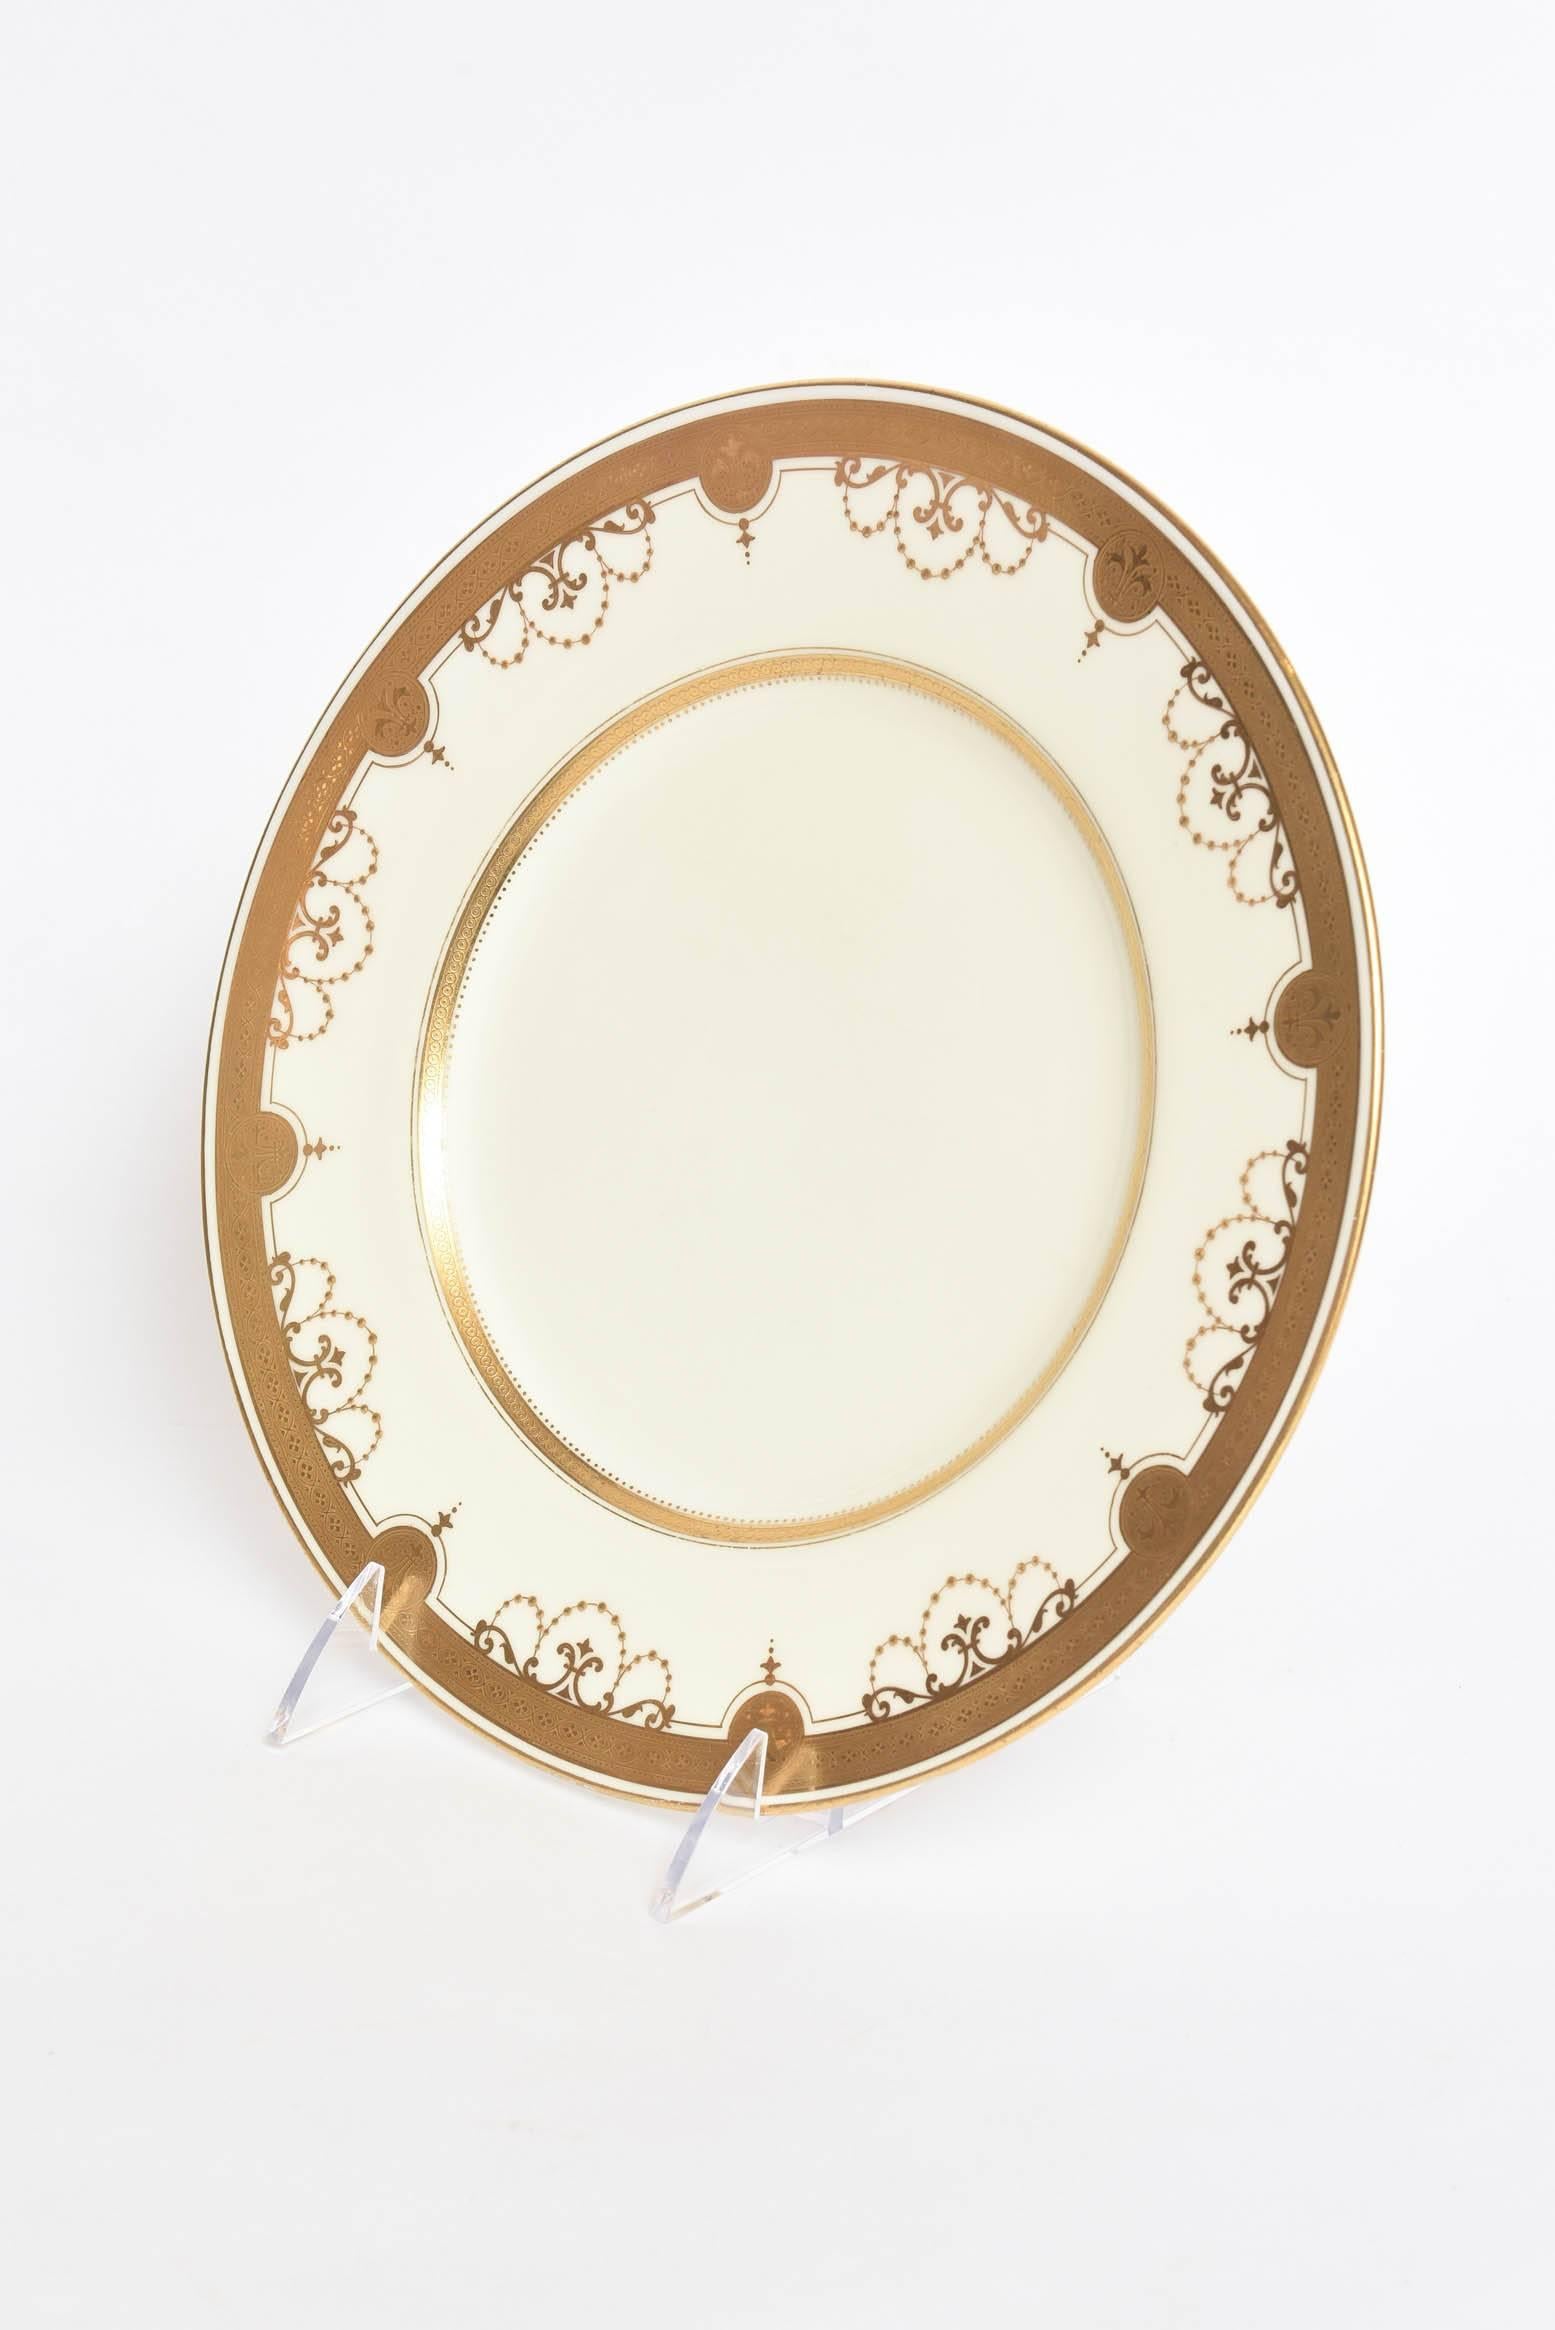 A Classic and wonderful antique pattern by Minton, England. We love the crisp detailing of the collar decoration in their signature raised tooled bead and gold medallion design. Nice clean centers and would mix and match with all your fine porcelain